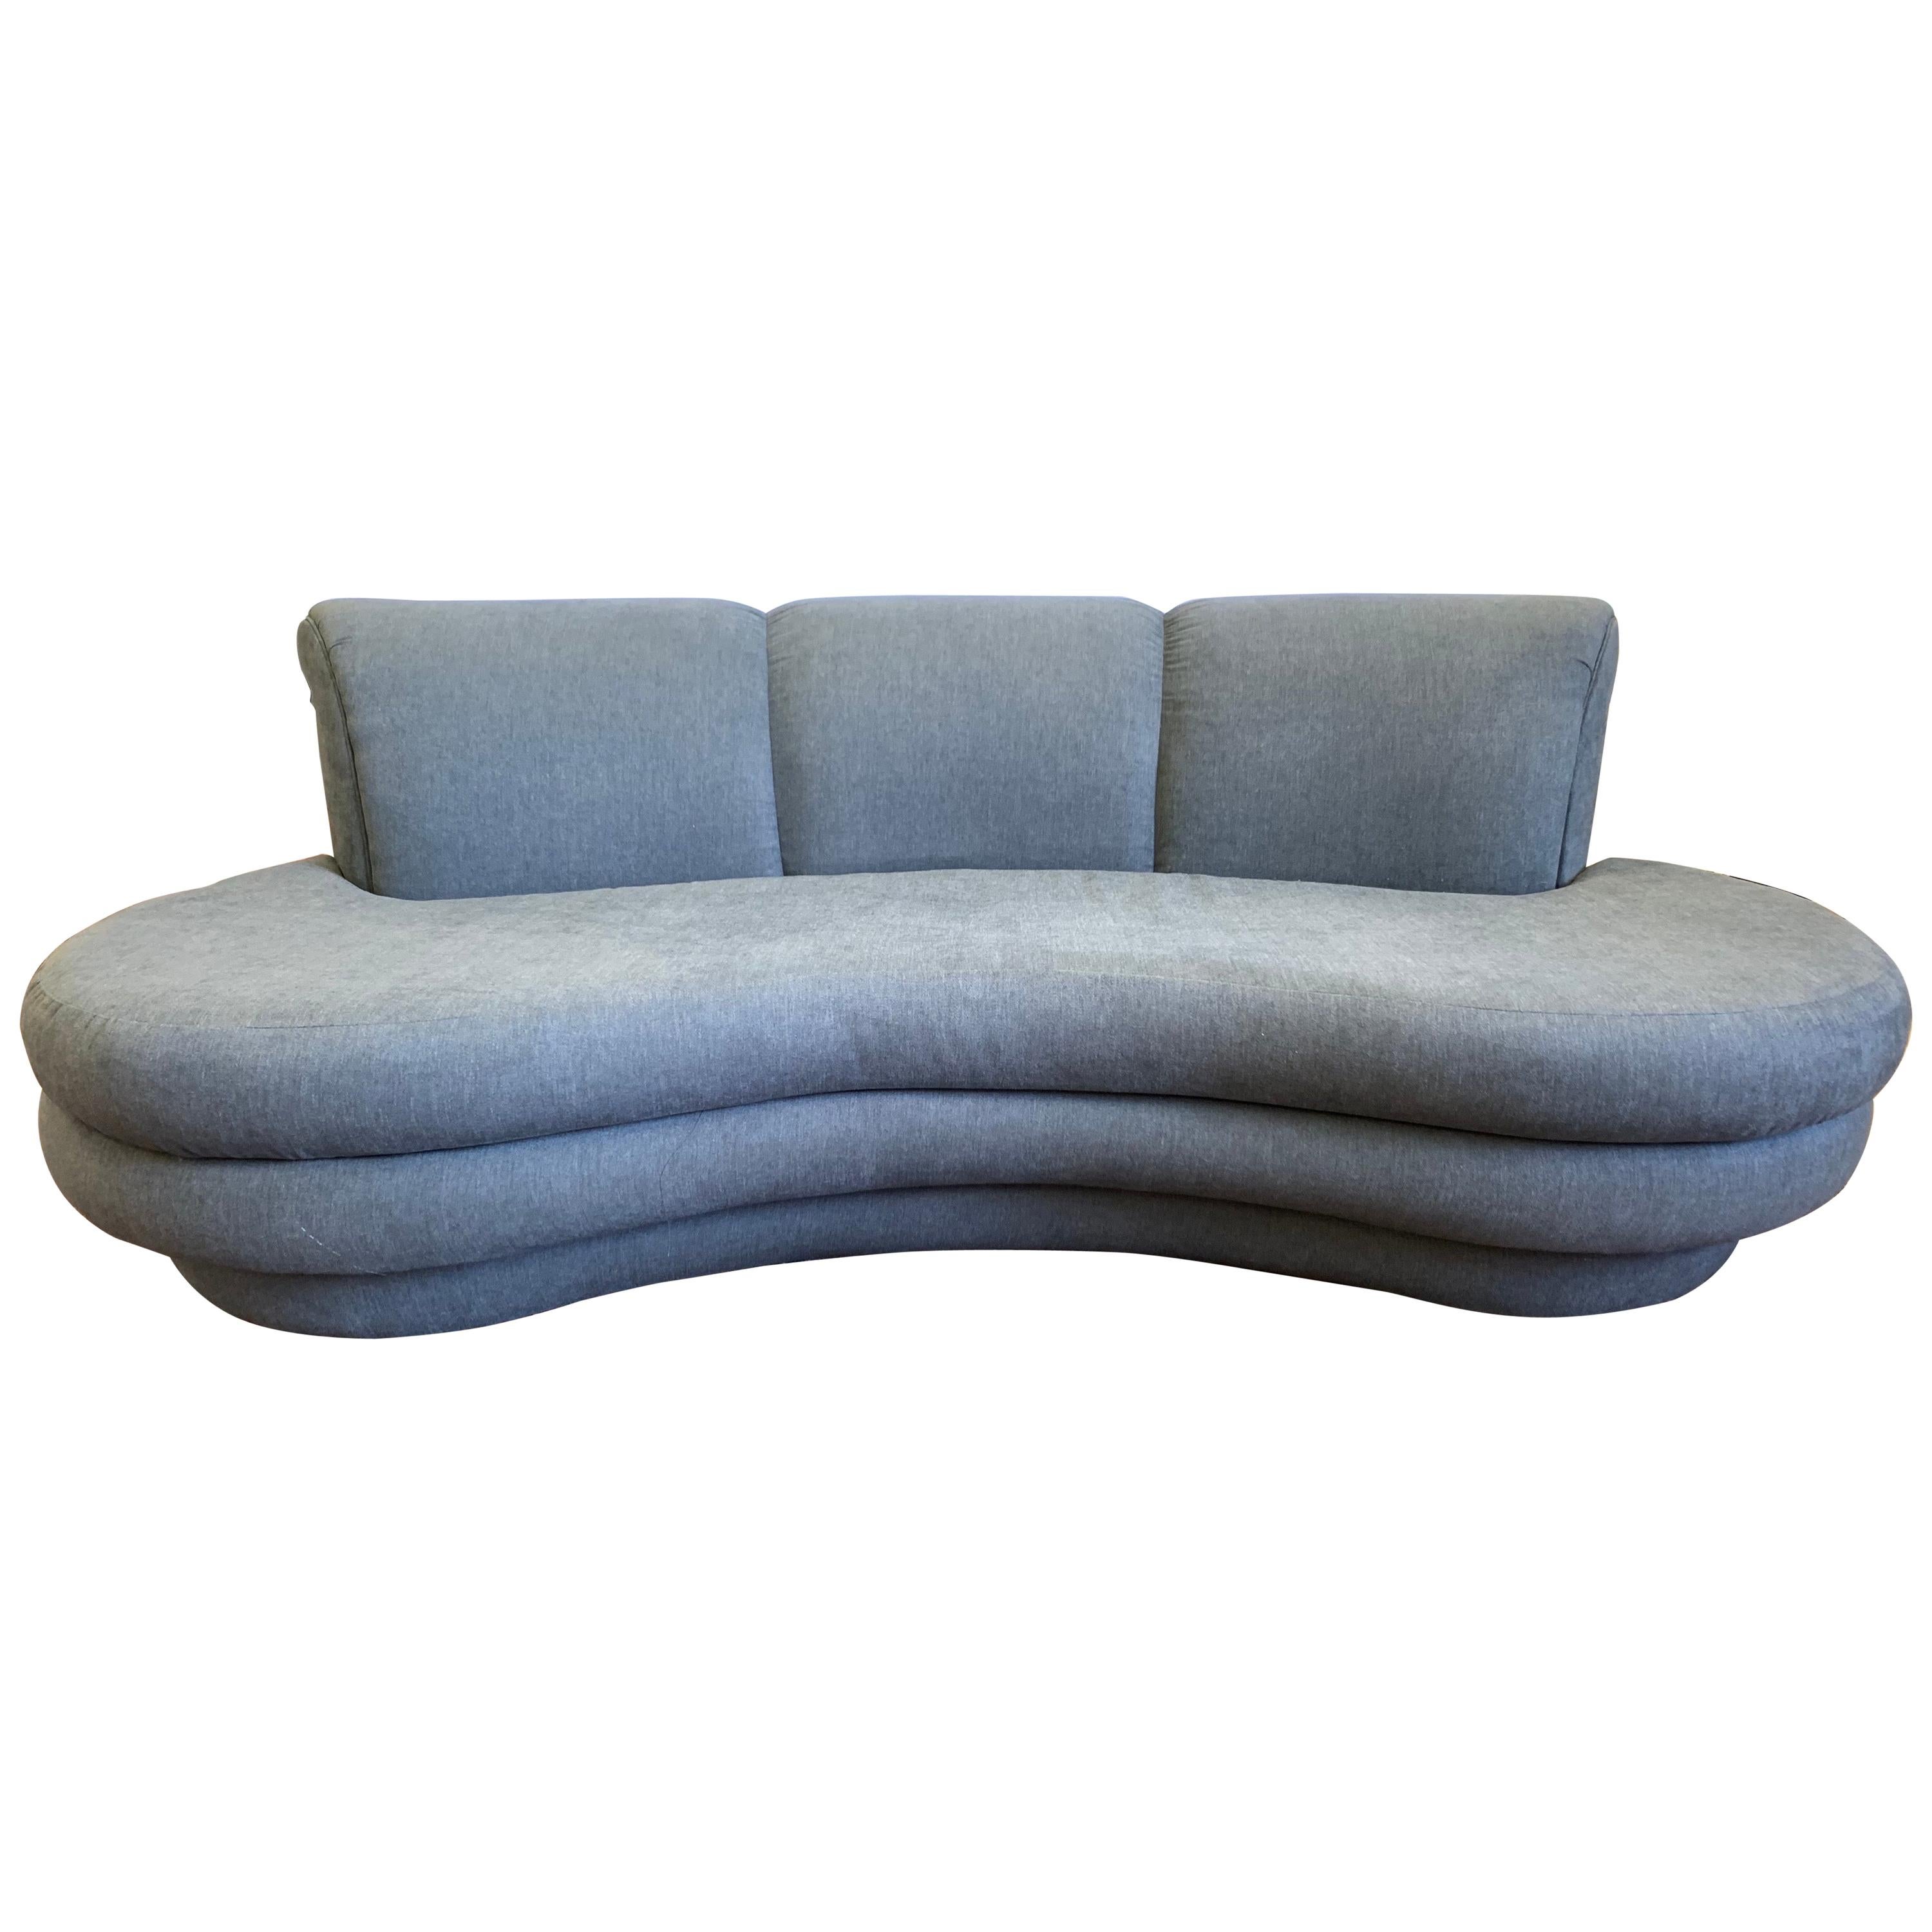 Adrian Pearsall Cloud Sofa for Comfort Designs Newly Upholstered in Slate Gray 